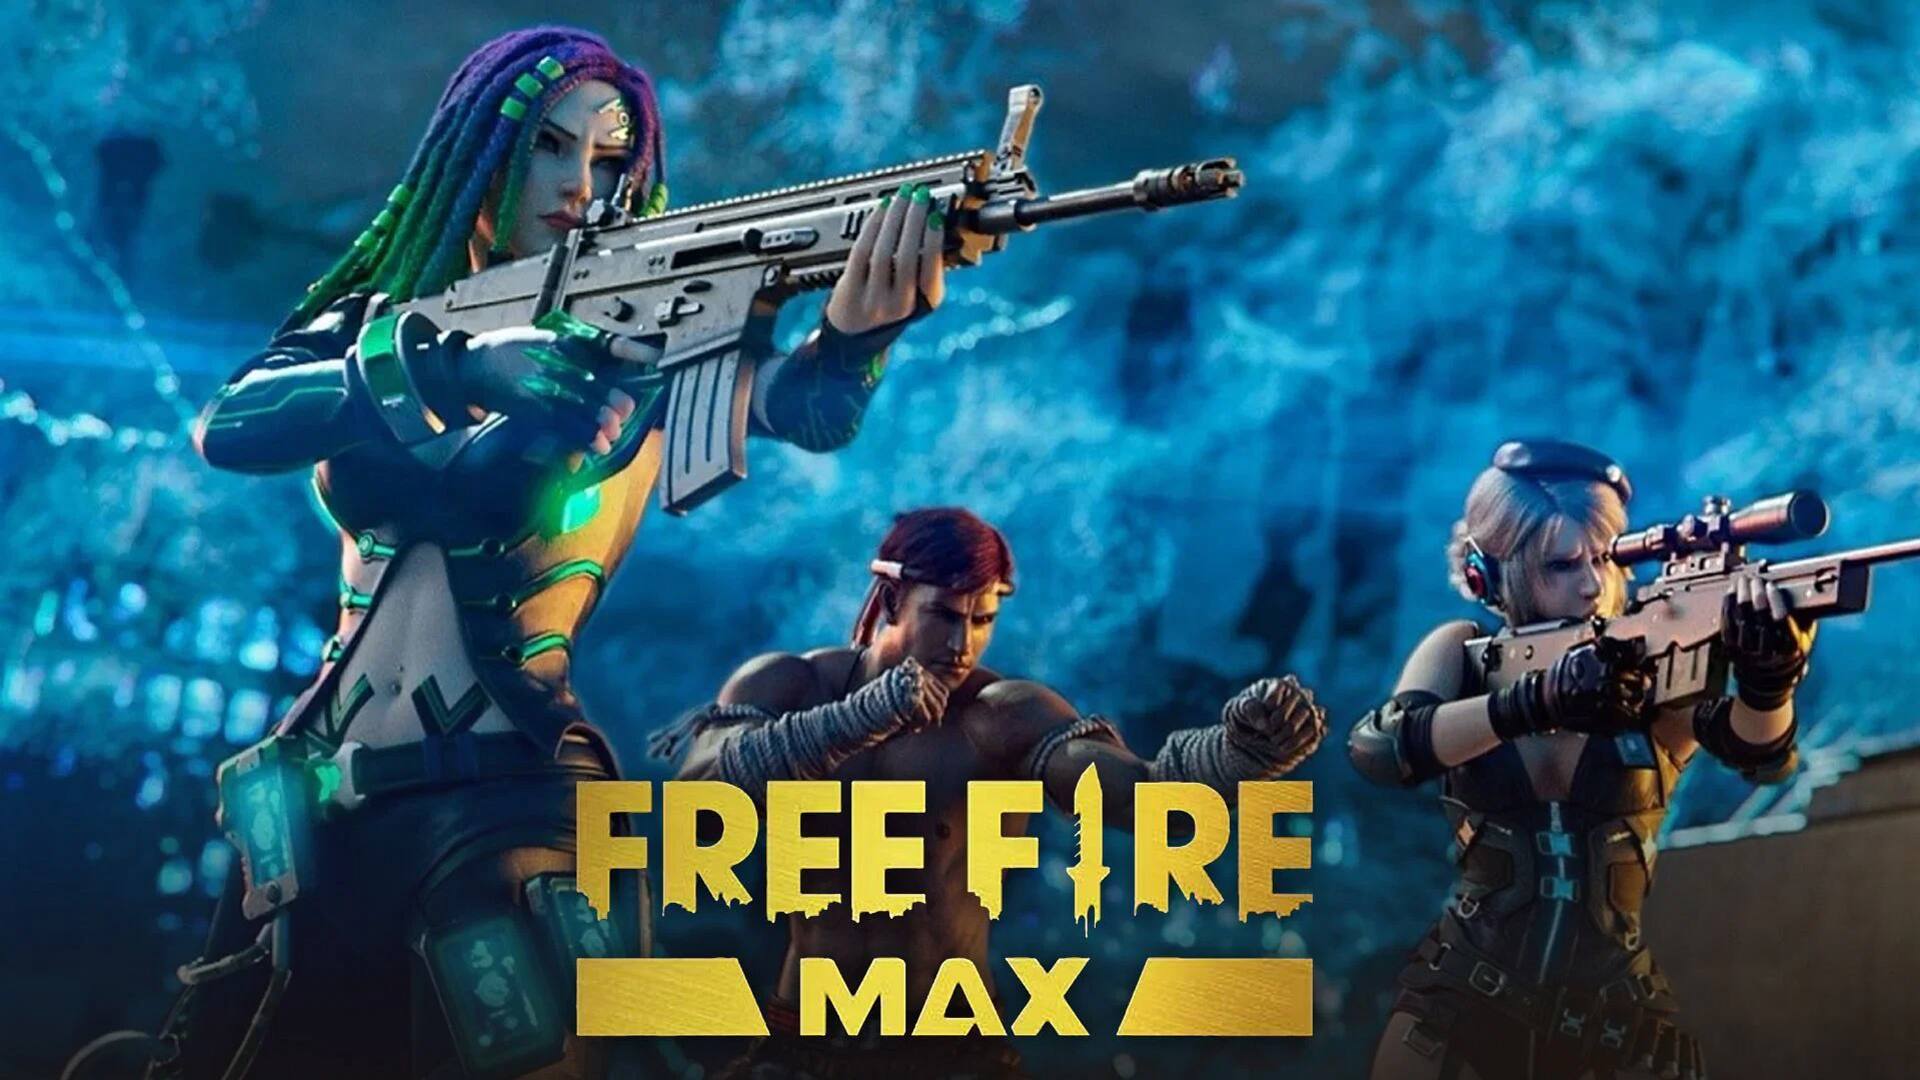 Garena Free Fire MAX codes for November 14: Redeem now